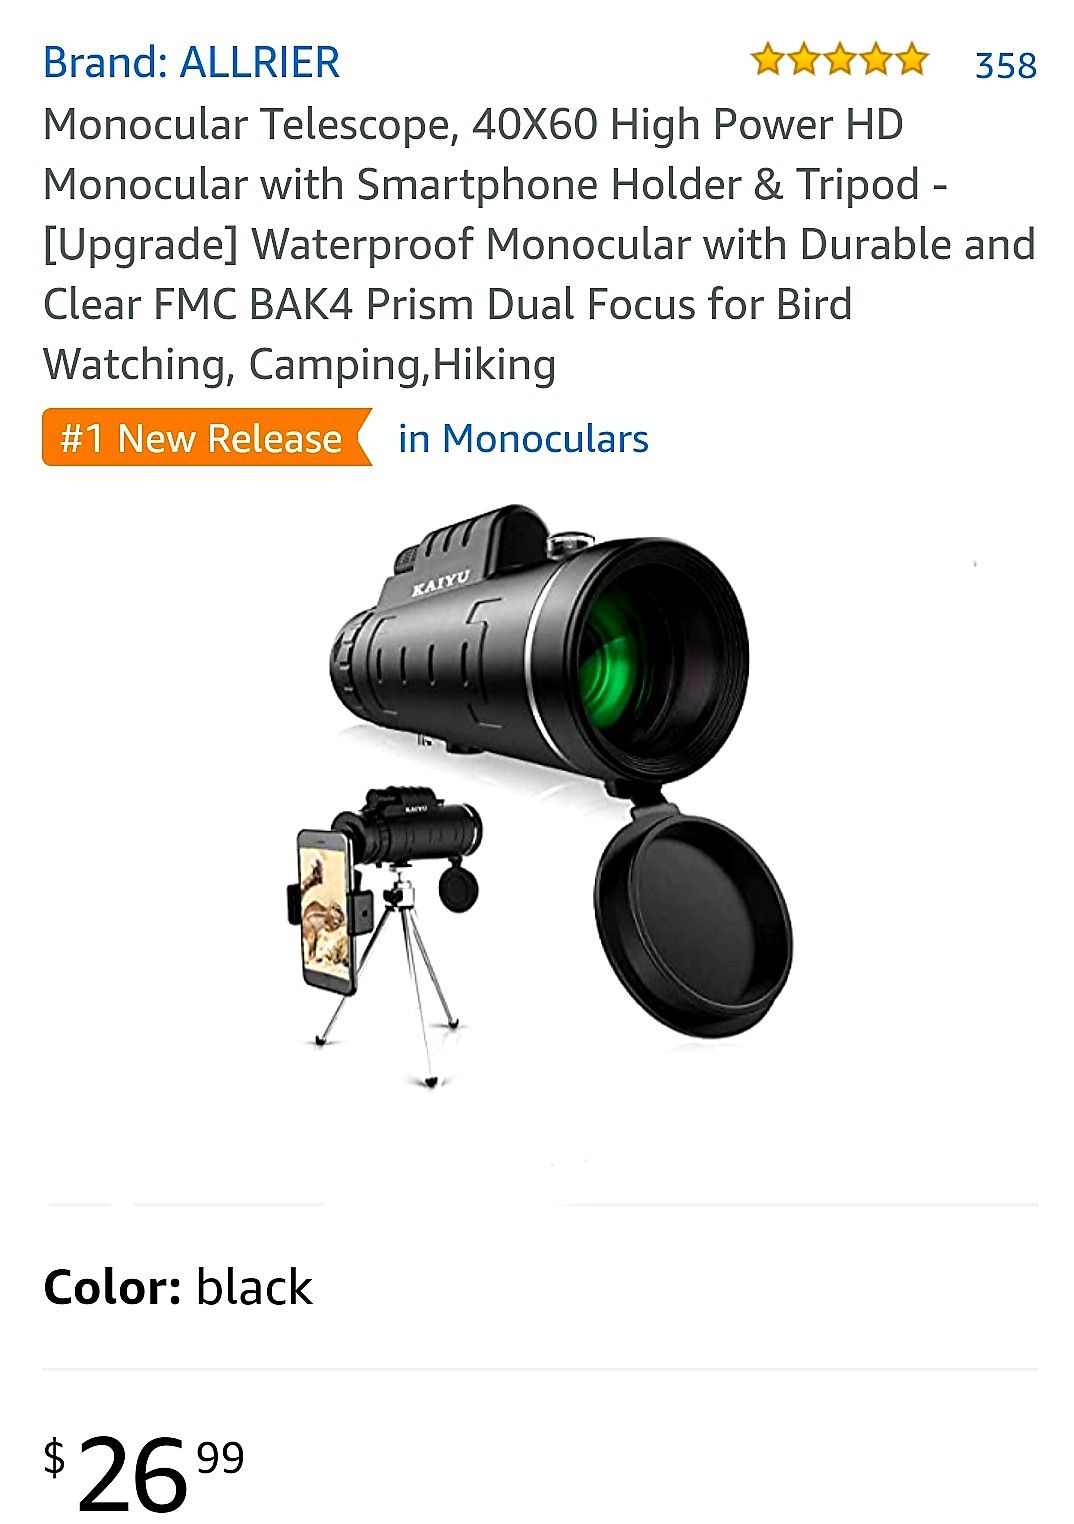 Monocular Telescope, 40X60 High Power HD Monocular with Smartphone Holder & Tripod - [Upgrade] Waterproof Monocular with Durable and Clear FMC BAK